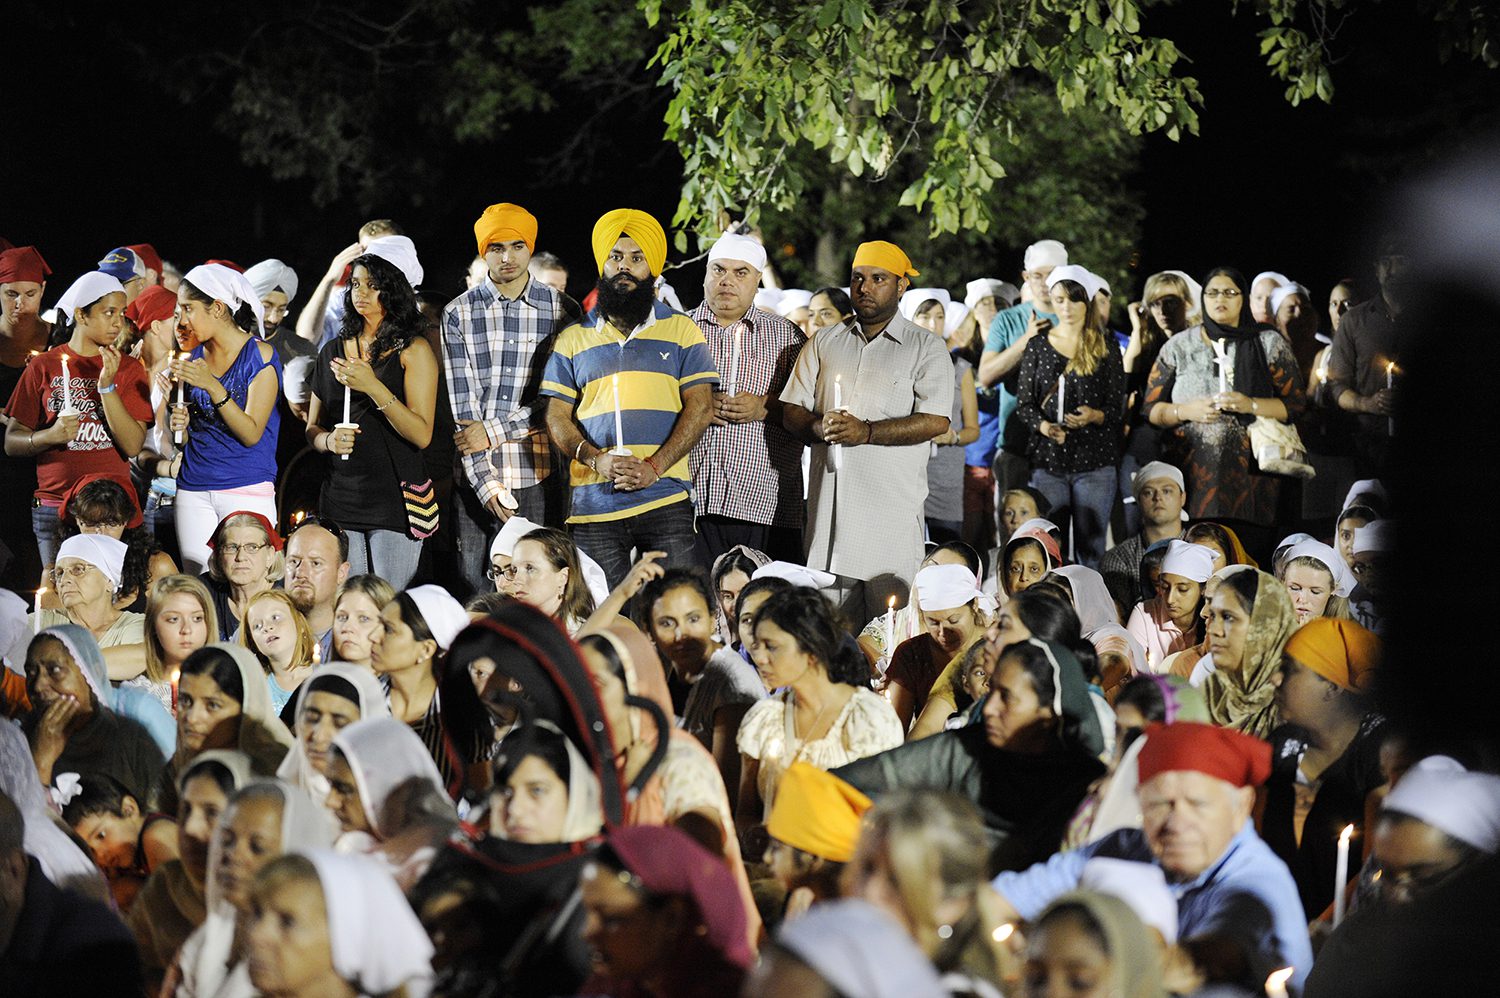 Community members joined the Sikhs by wearing head coverings during the vigil in Oak Creek on Tuesday, Aug. 7, 2012. Photo by Ernie Mastroianni photo, courtesy of Sikh Coalition